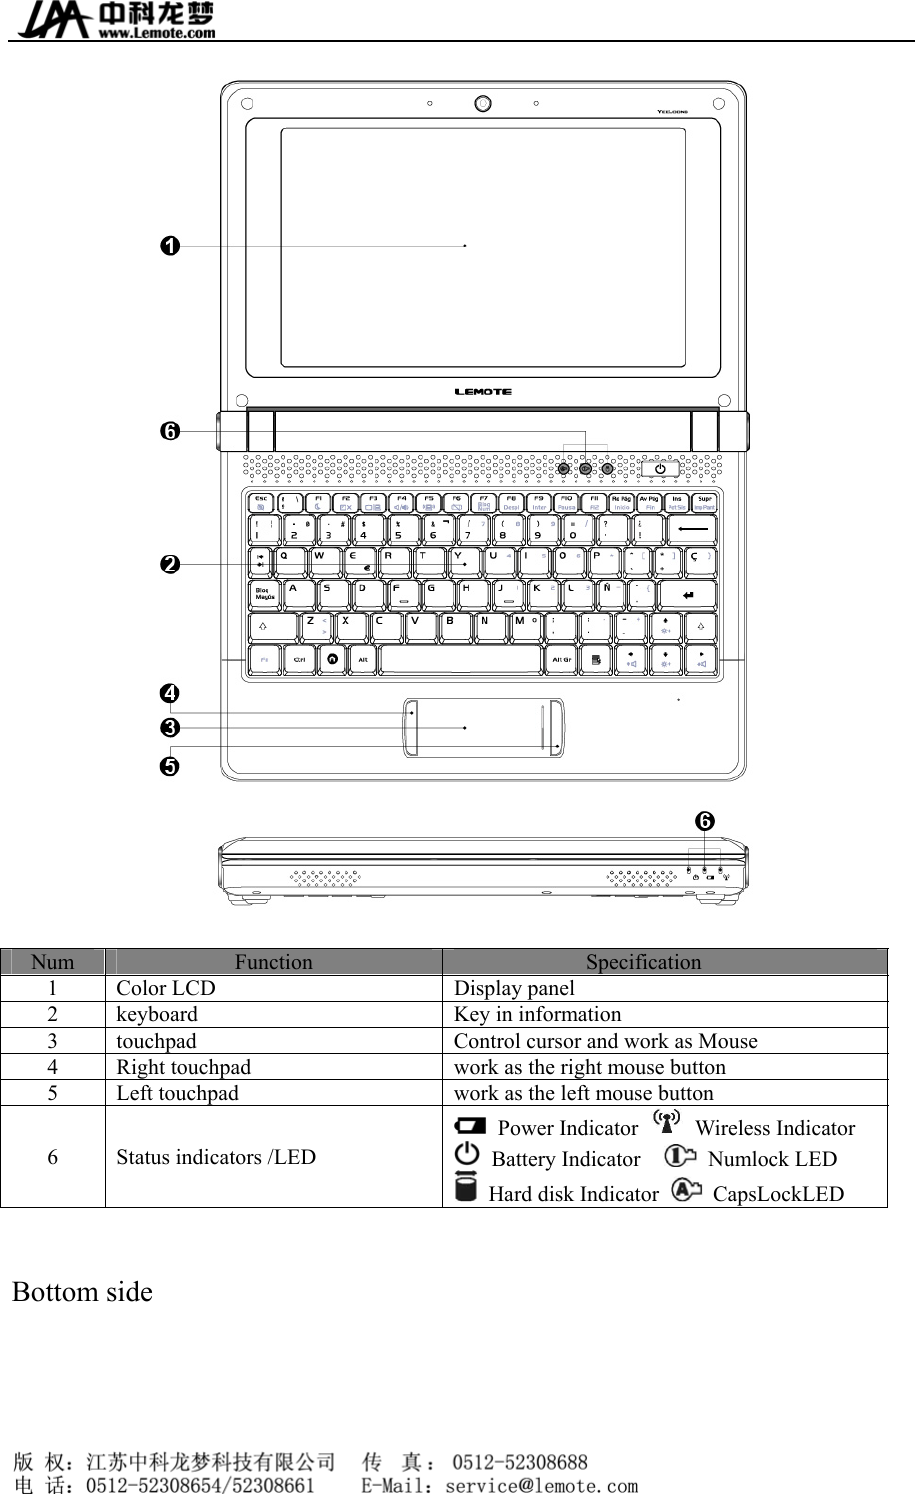    Num  Function              Specification 1  Color LCD  Display panel   2  keyboard  Key in information 3  touchpad  Control cursor and work as Mouse   4  Right touchpad  work as the right mouse button 5  Left touchpad  work as the left mouse button   6  Status indicators /LED  Power Indicator   Wireless Indicator  Battery Indicator    Numlock LED   Hard disk Indicator   CapsLockLED    Bottom side     